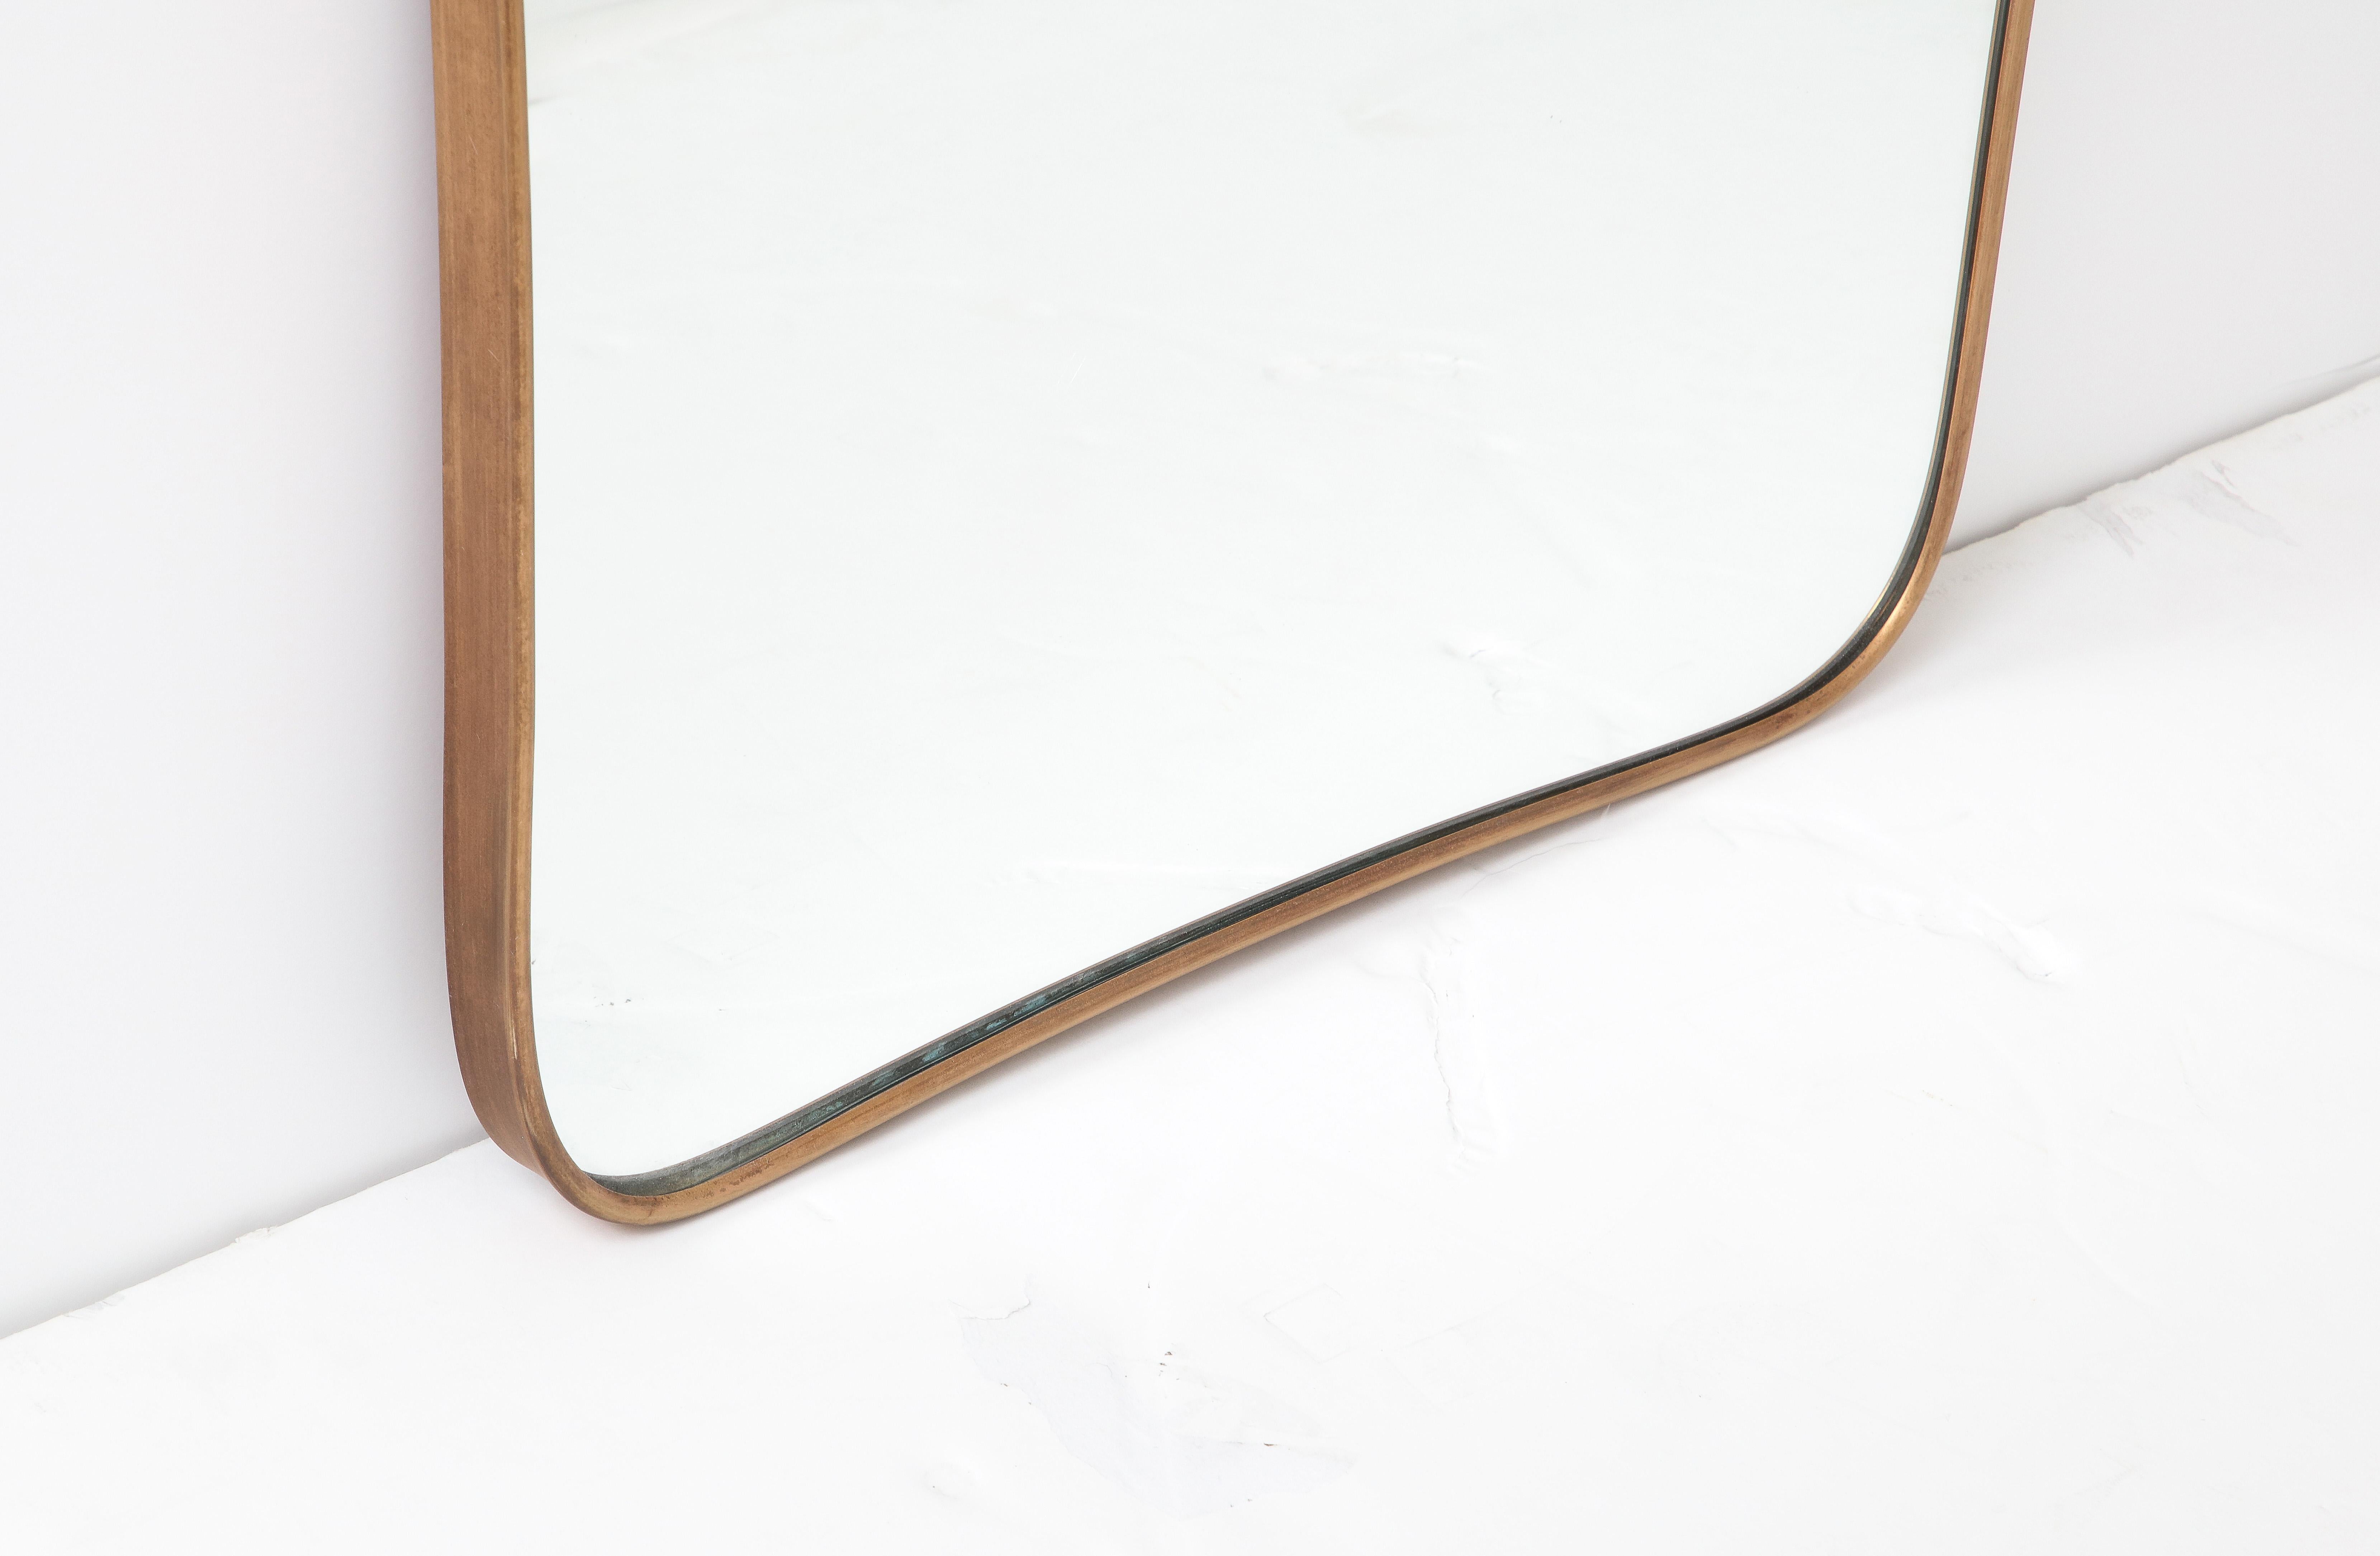 1950s Italian Modernist Brass Mirror with Scroll Top Attributed to Gio Ponti 6